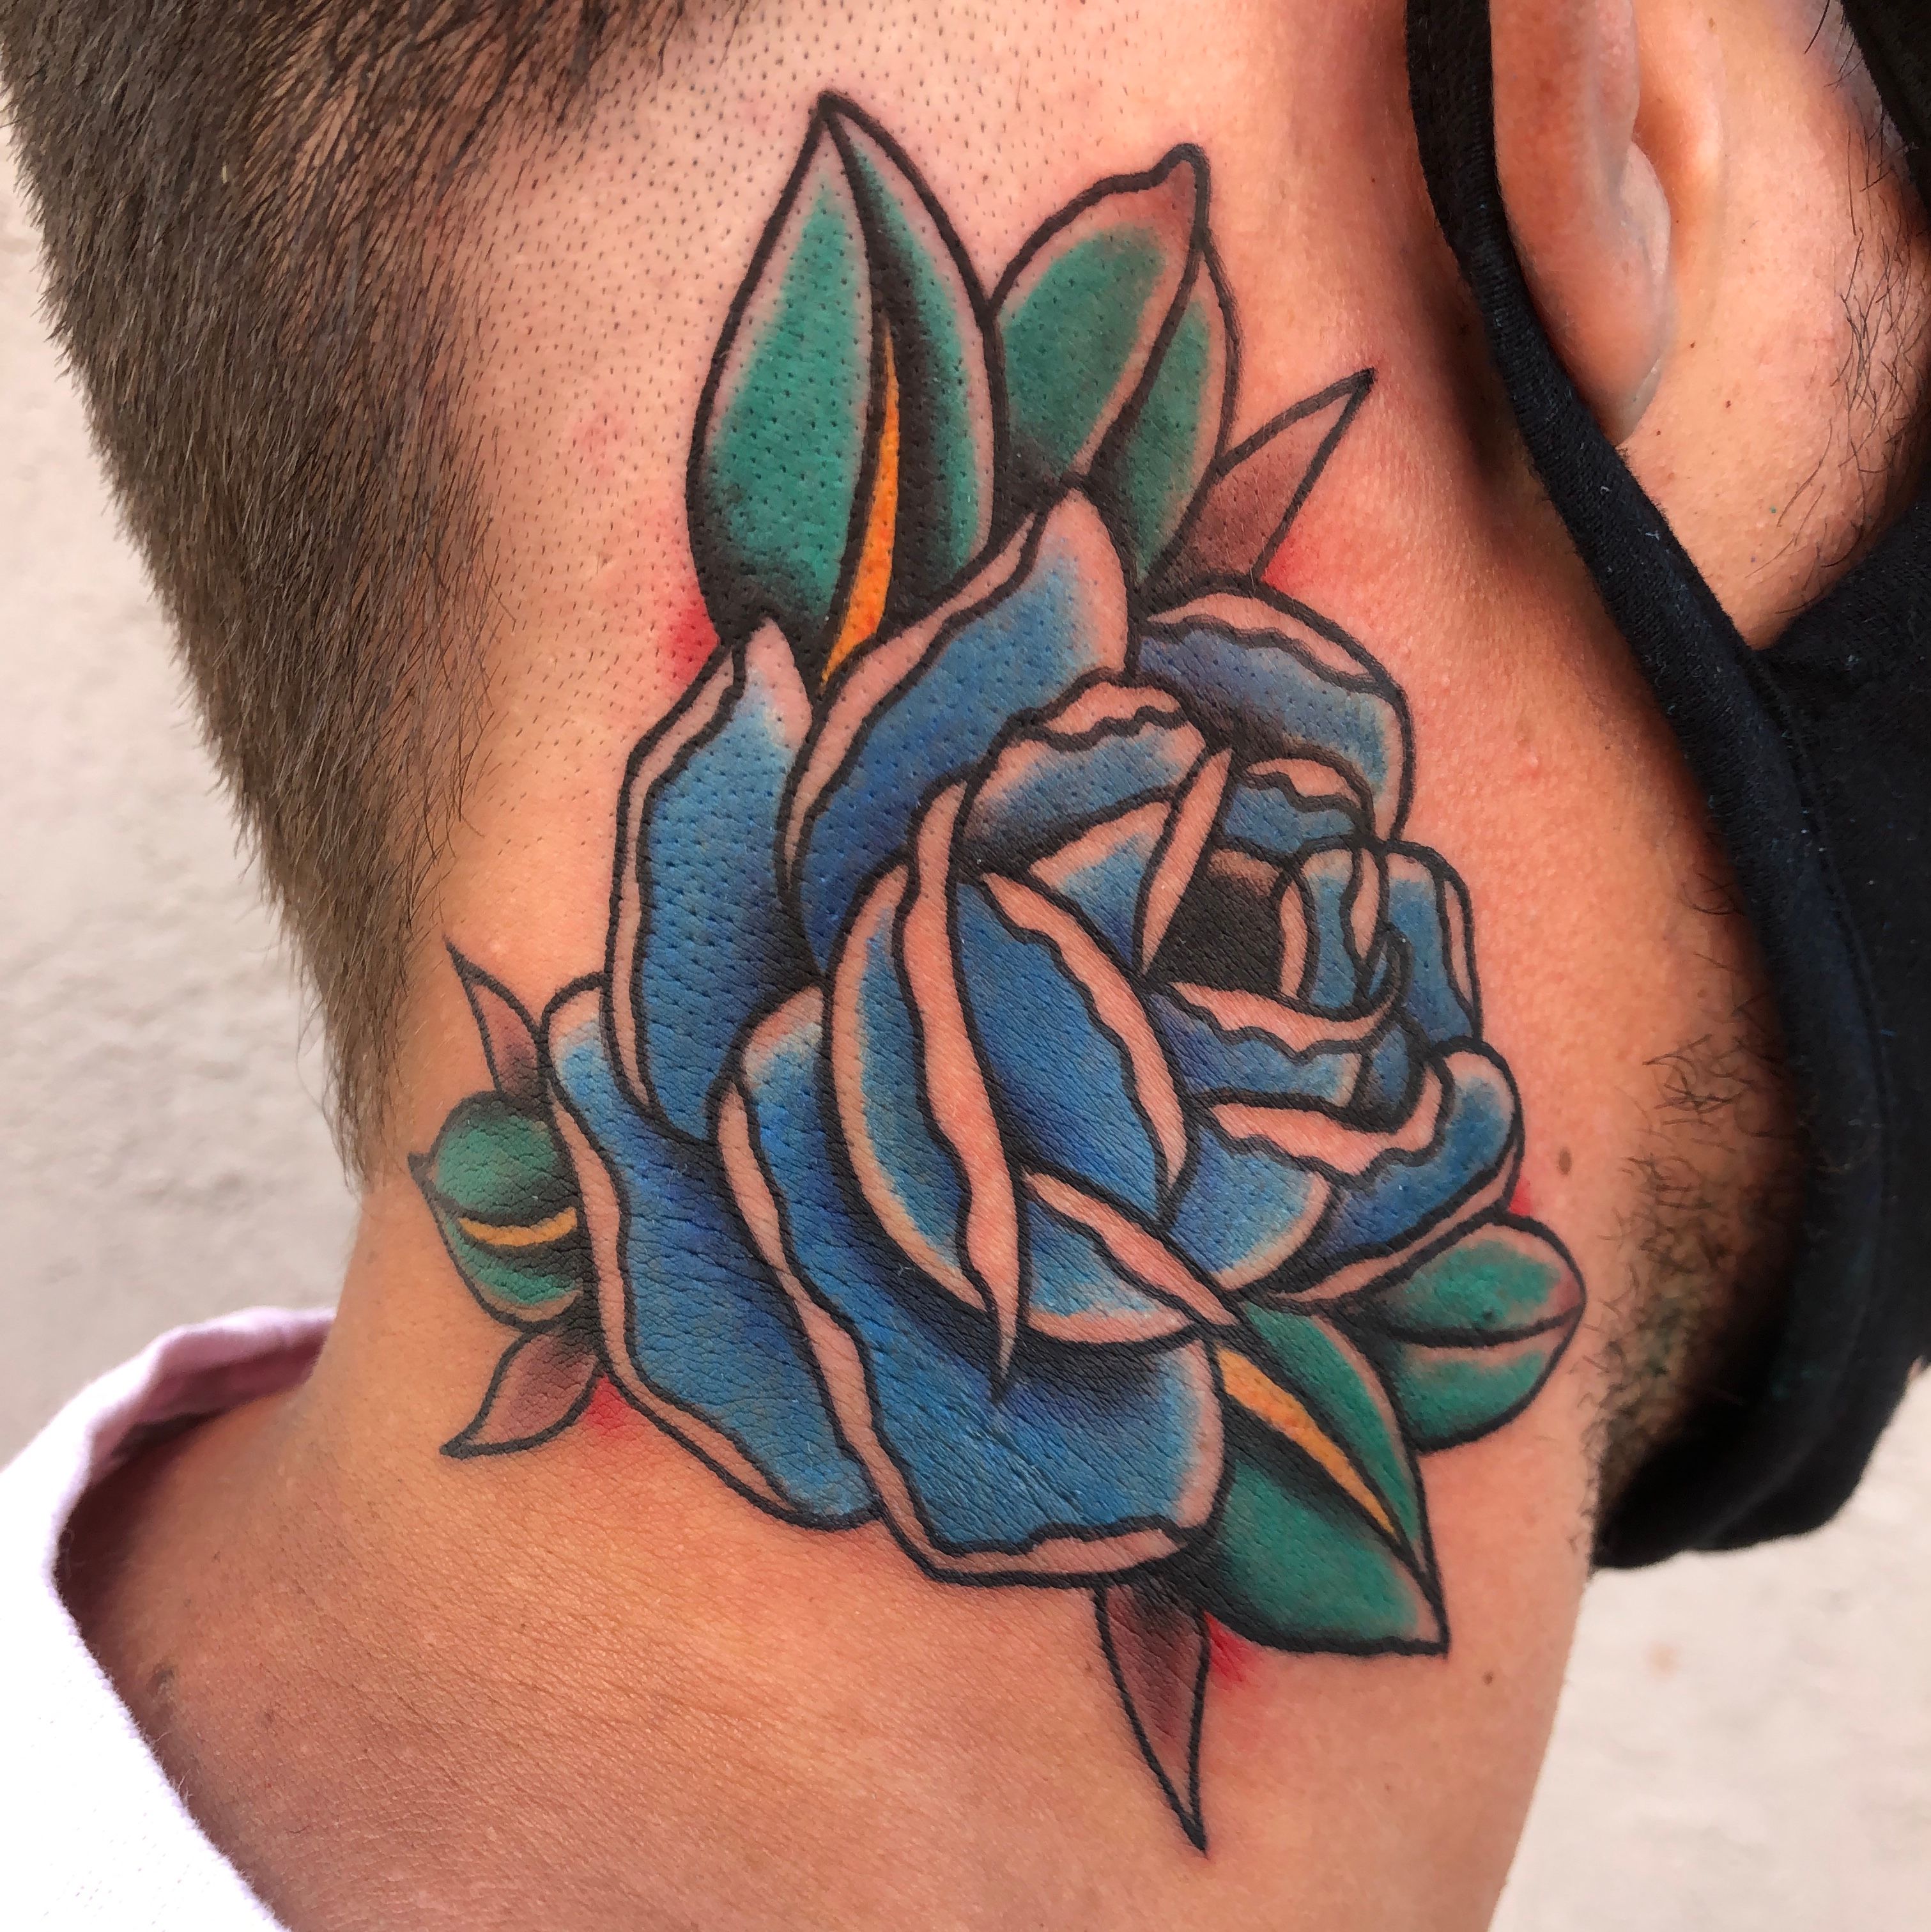 Tattoo uploaded by Dustin Gormley • A bold traditional blue rose. Camron  drove 8 hours to get his neck tattoo tattooed. Thank you for the dedication  🙏 • Tattoodo